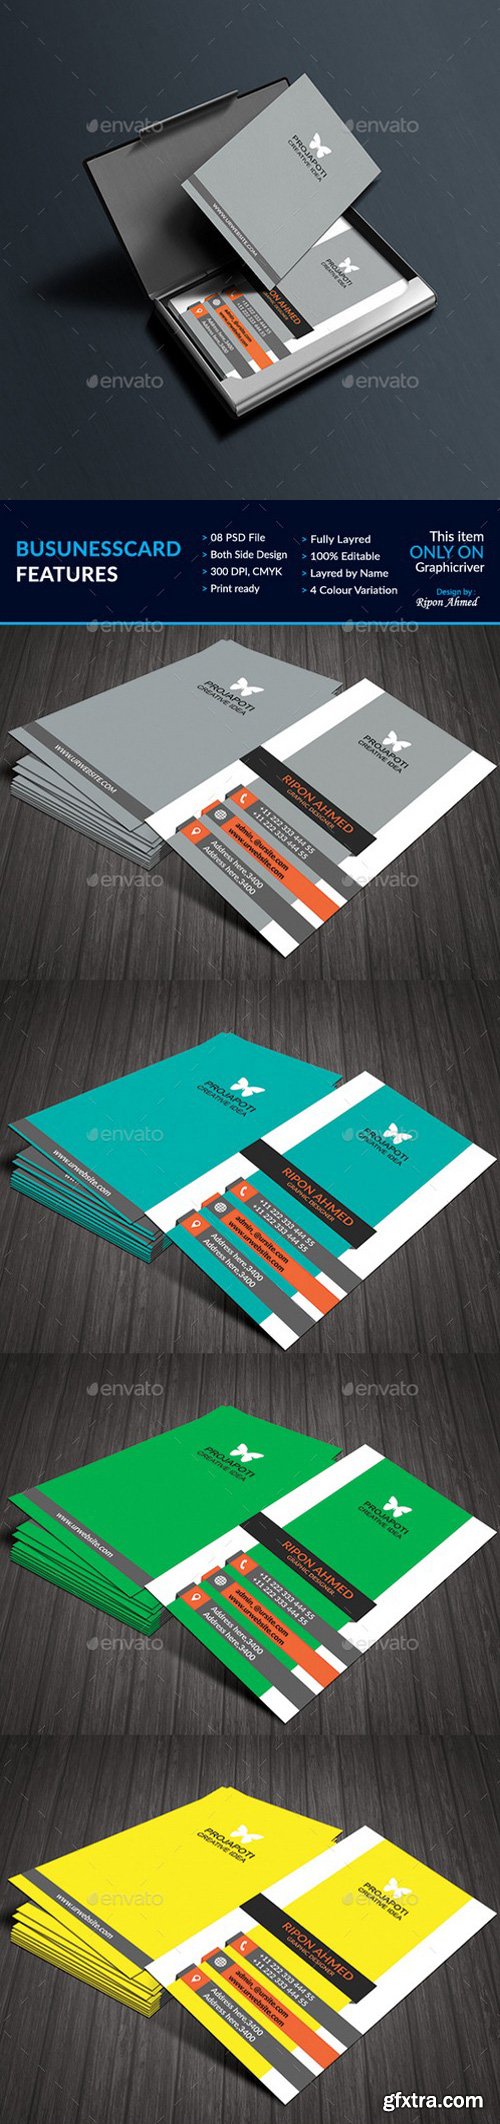 Graphicriver - Smart Vertical Business Card 19362784